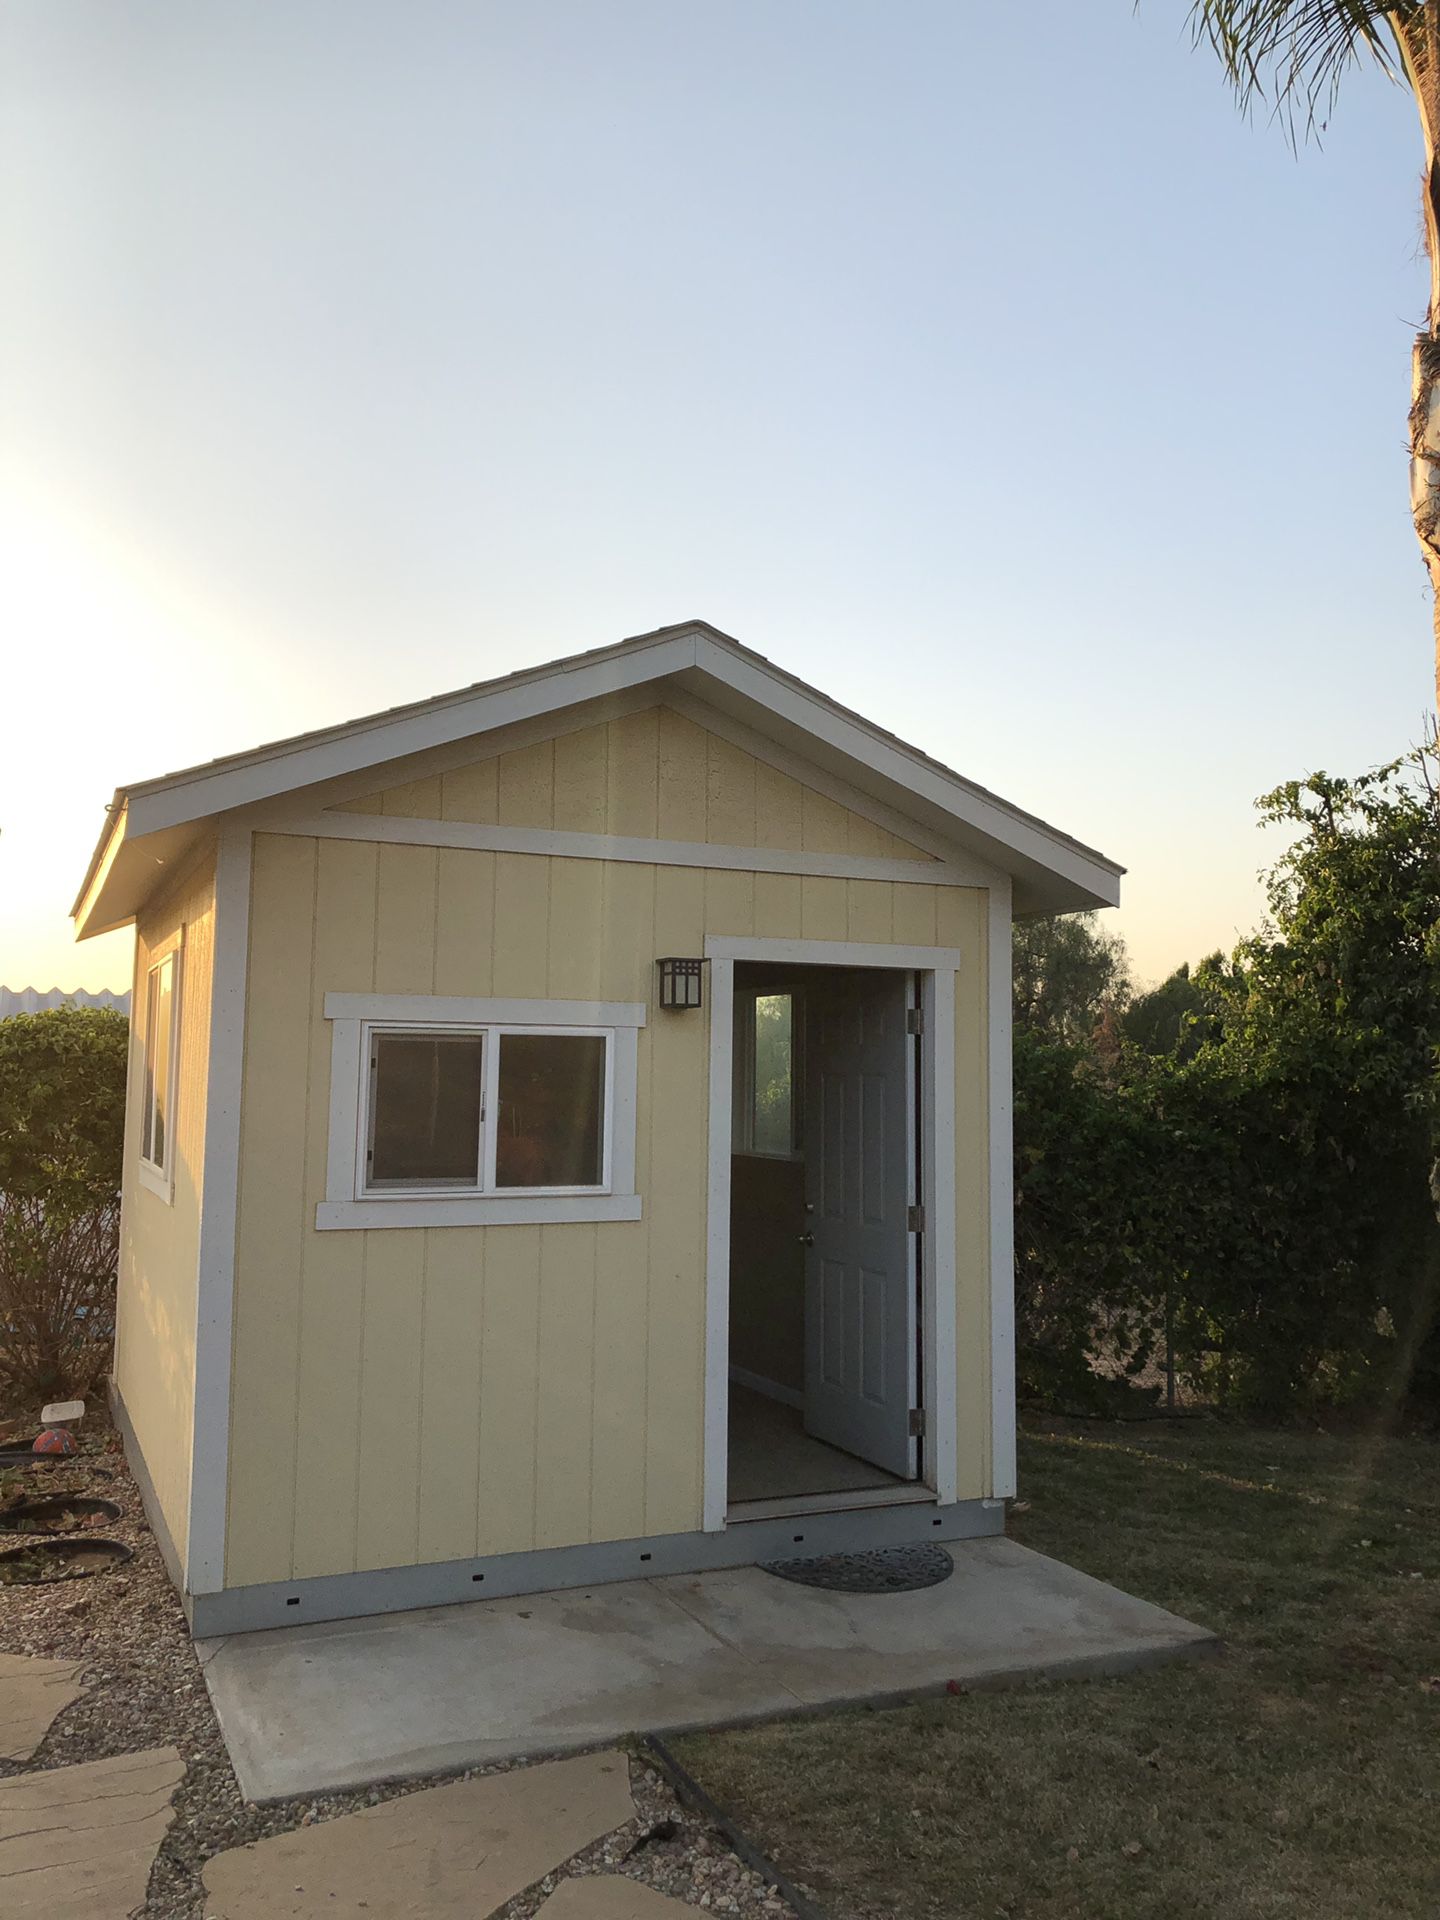 12’ x 10’ Tuff shed- Office